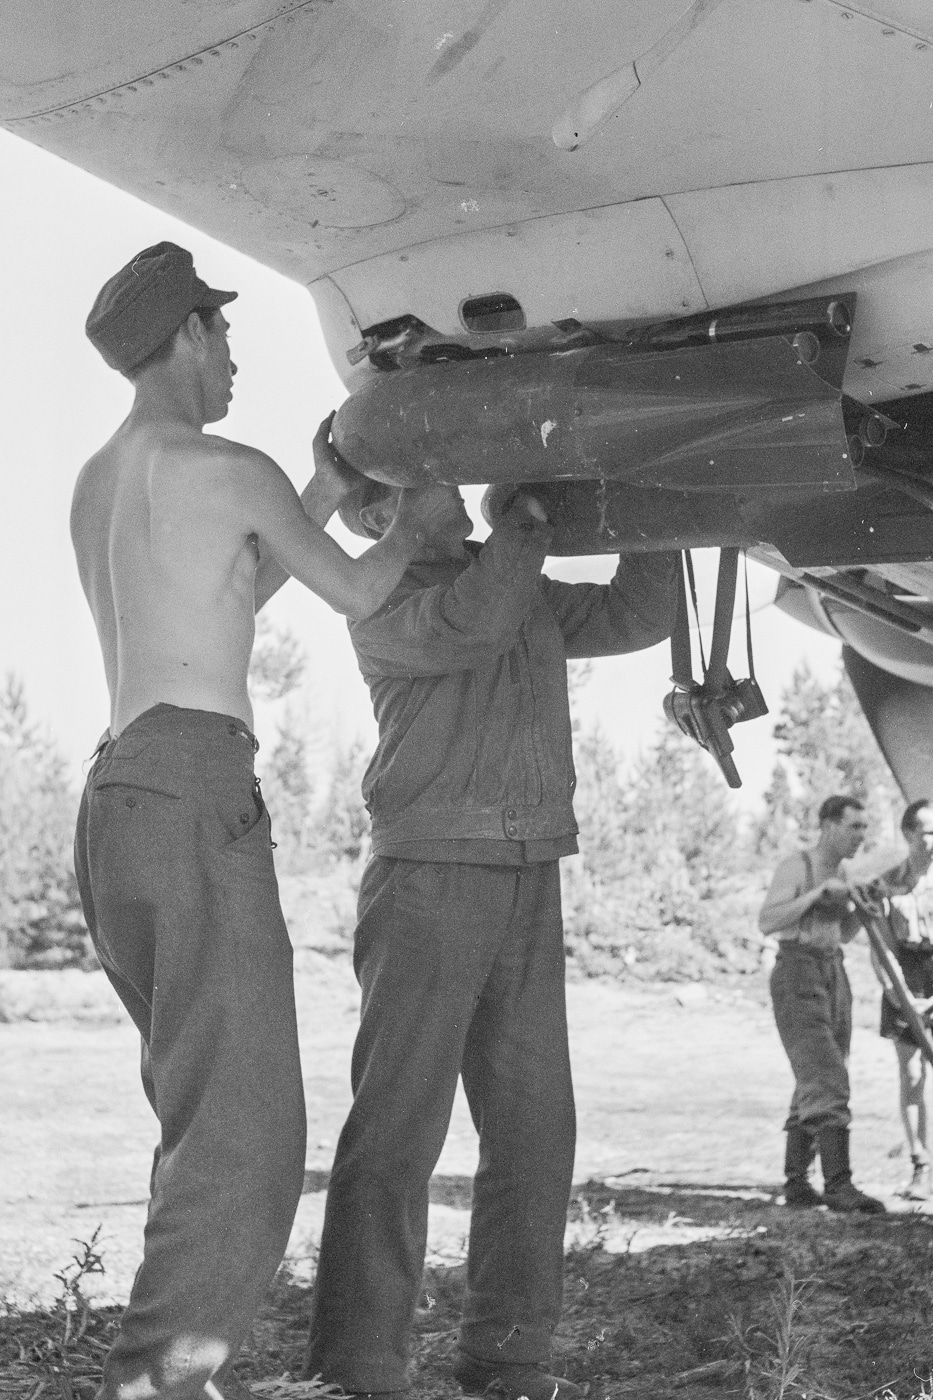 Shown here are two German members of the ground crew attaching a 50 kg bomb to the underside of a Stuka wing. A total of four (4) of these bombs could be attached to the plane's wings.